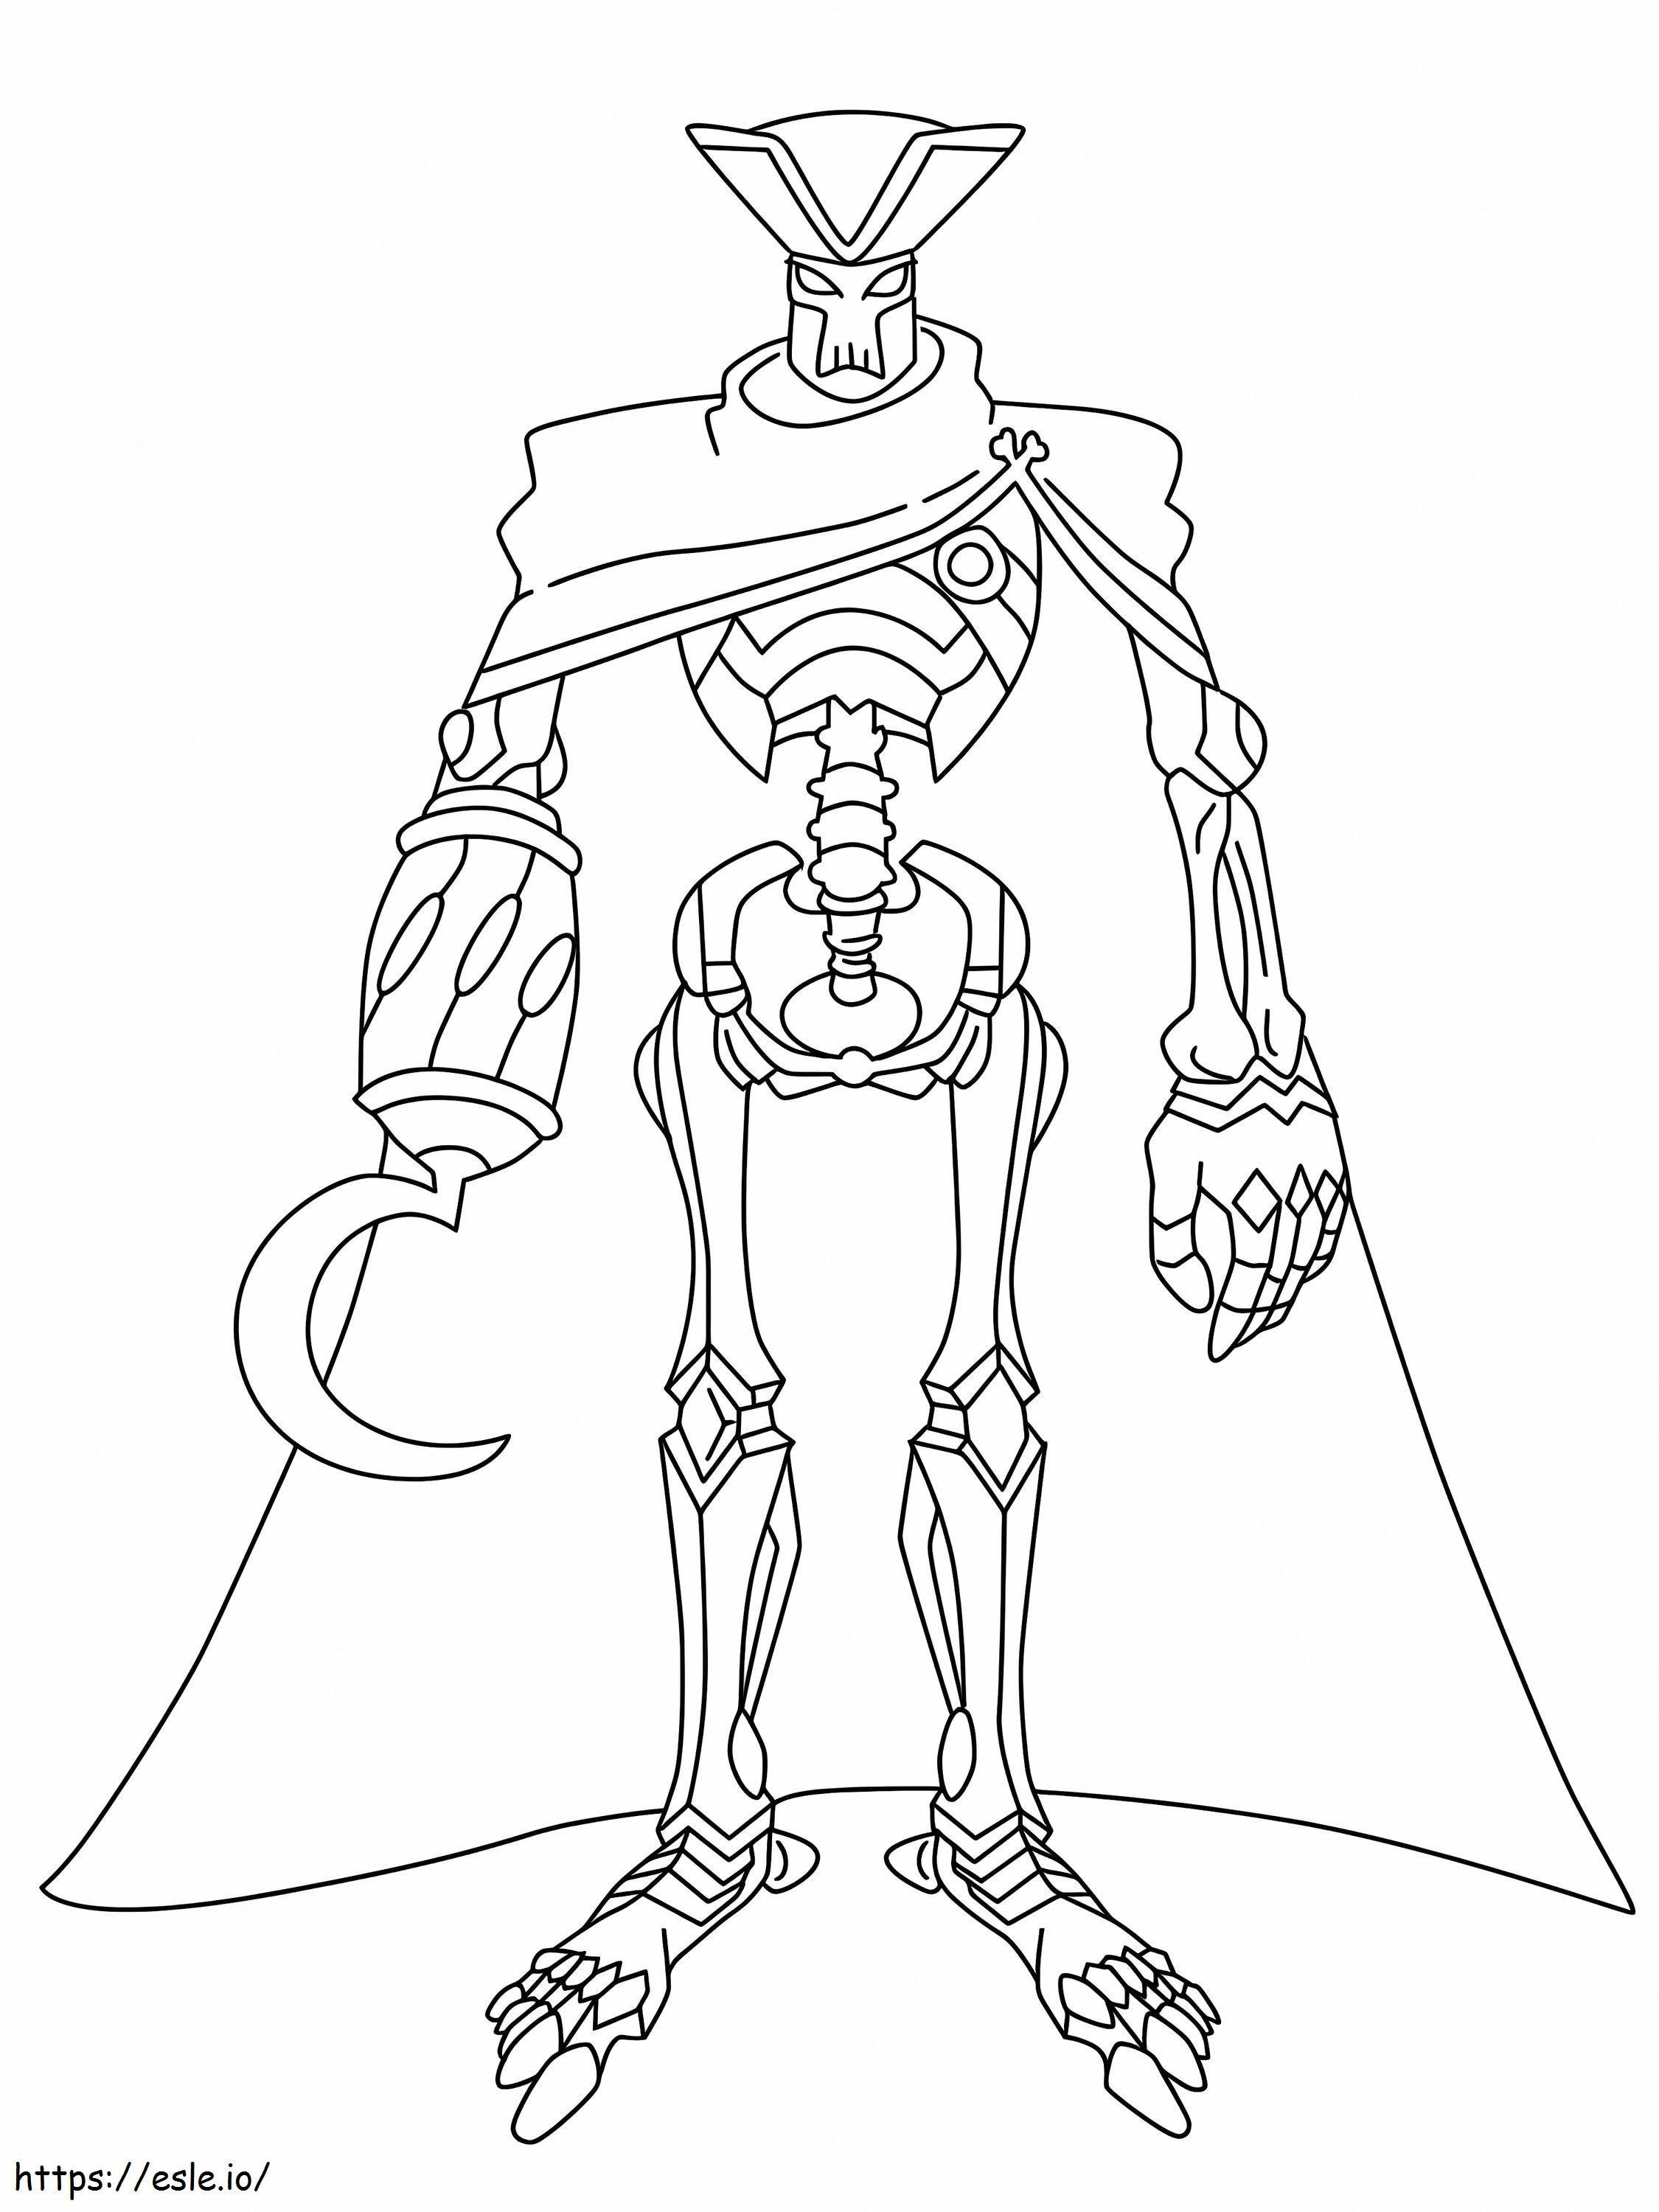 Golden Bones From Zak Storm coloring page